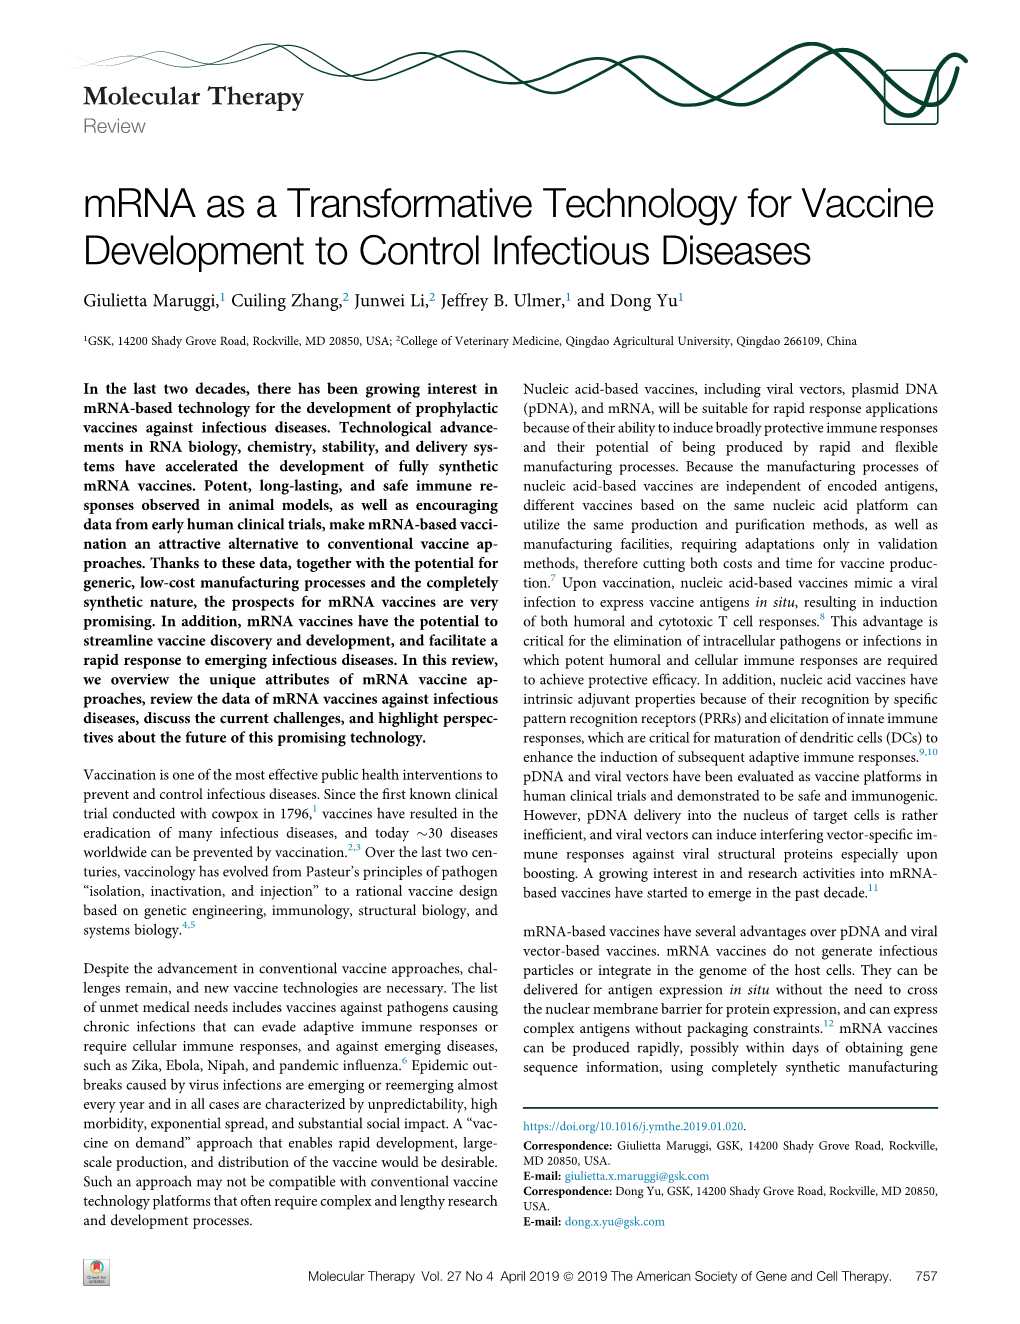 Mrna As a Transformative Technology for Vaccine Development to Control Infectious Diseases